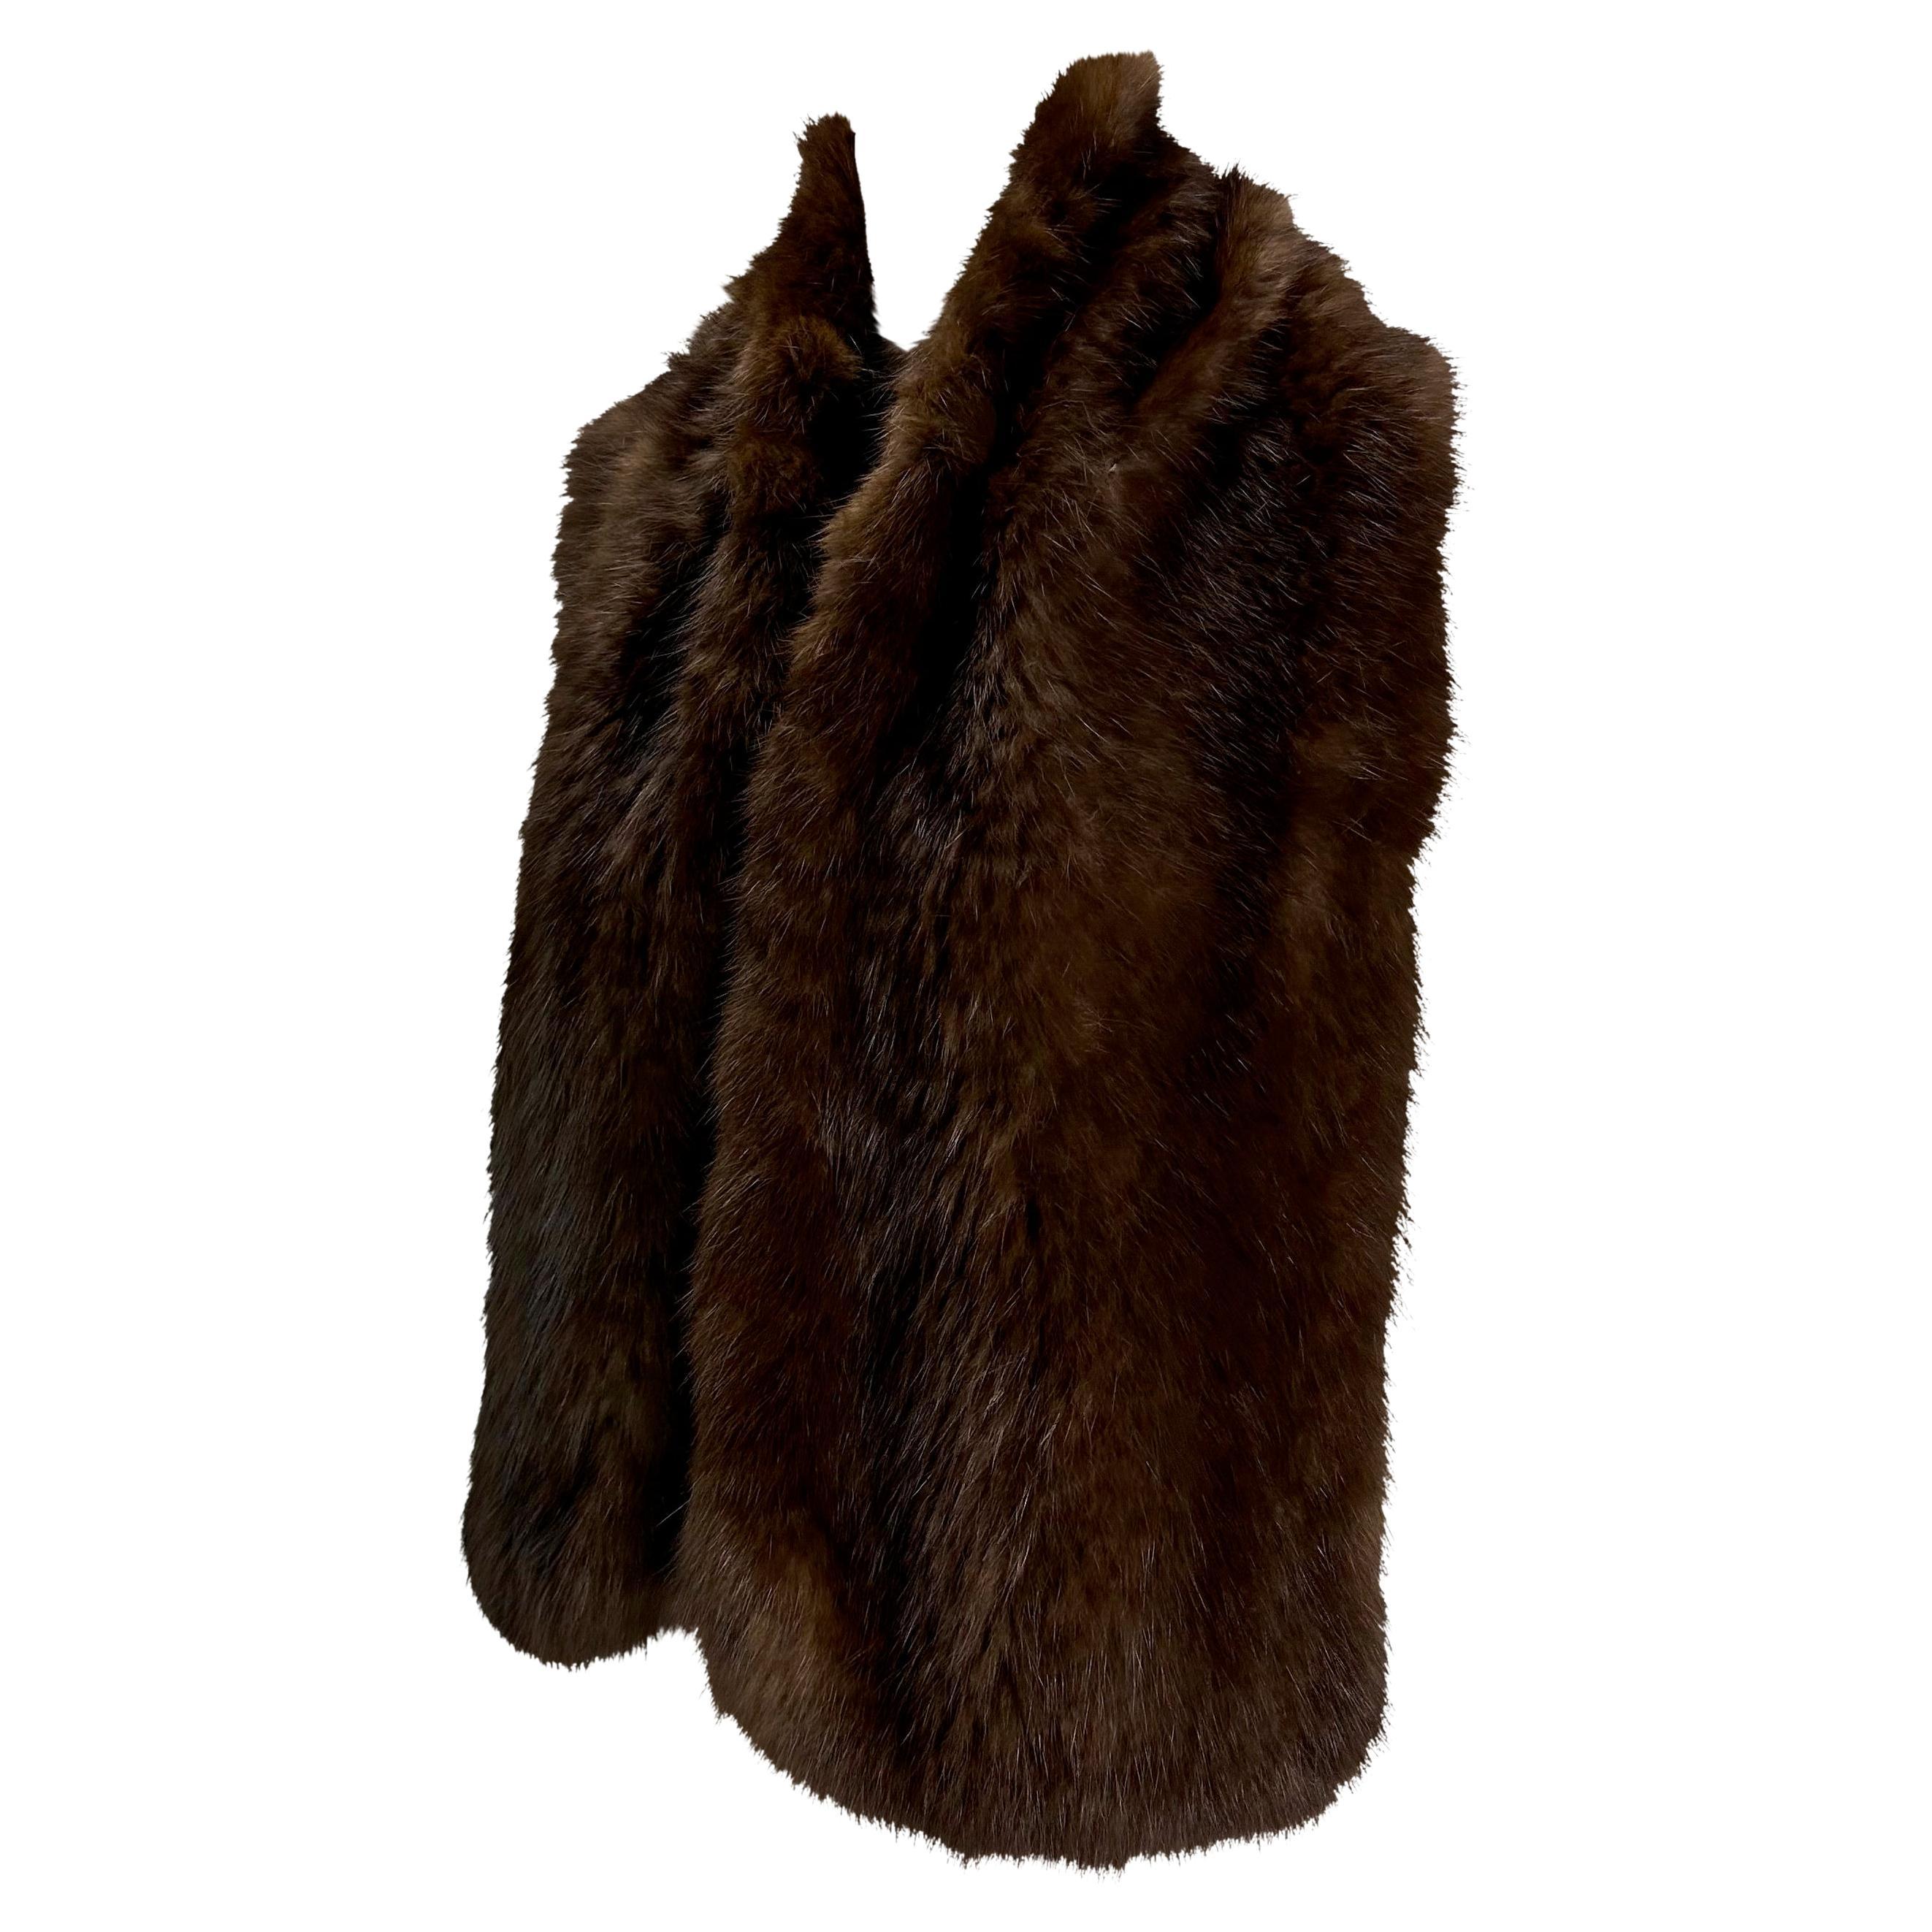 Presenting a fabulous brown knit mink Christian Dior scarf, designed by John Galliano. From the early 2000s, this luxurious scarf is the perfect addition to any winter wardrobe! 

Approximate measurements:
9